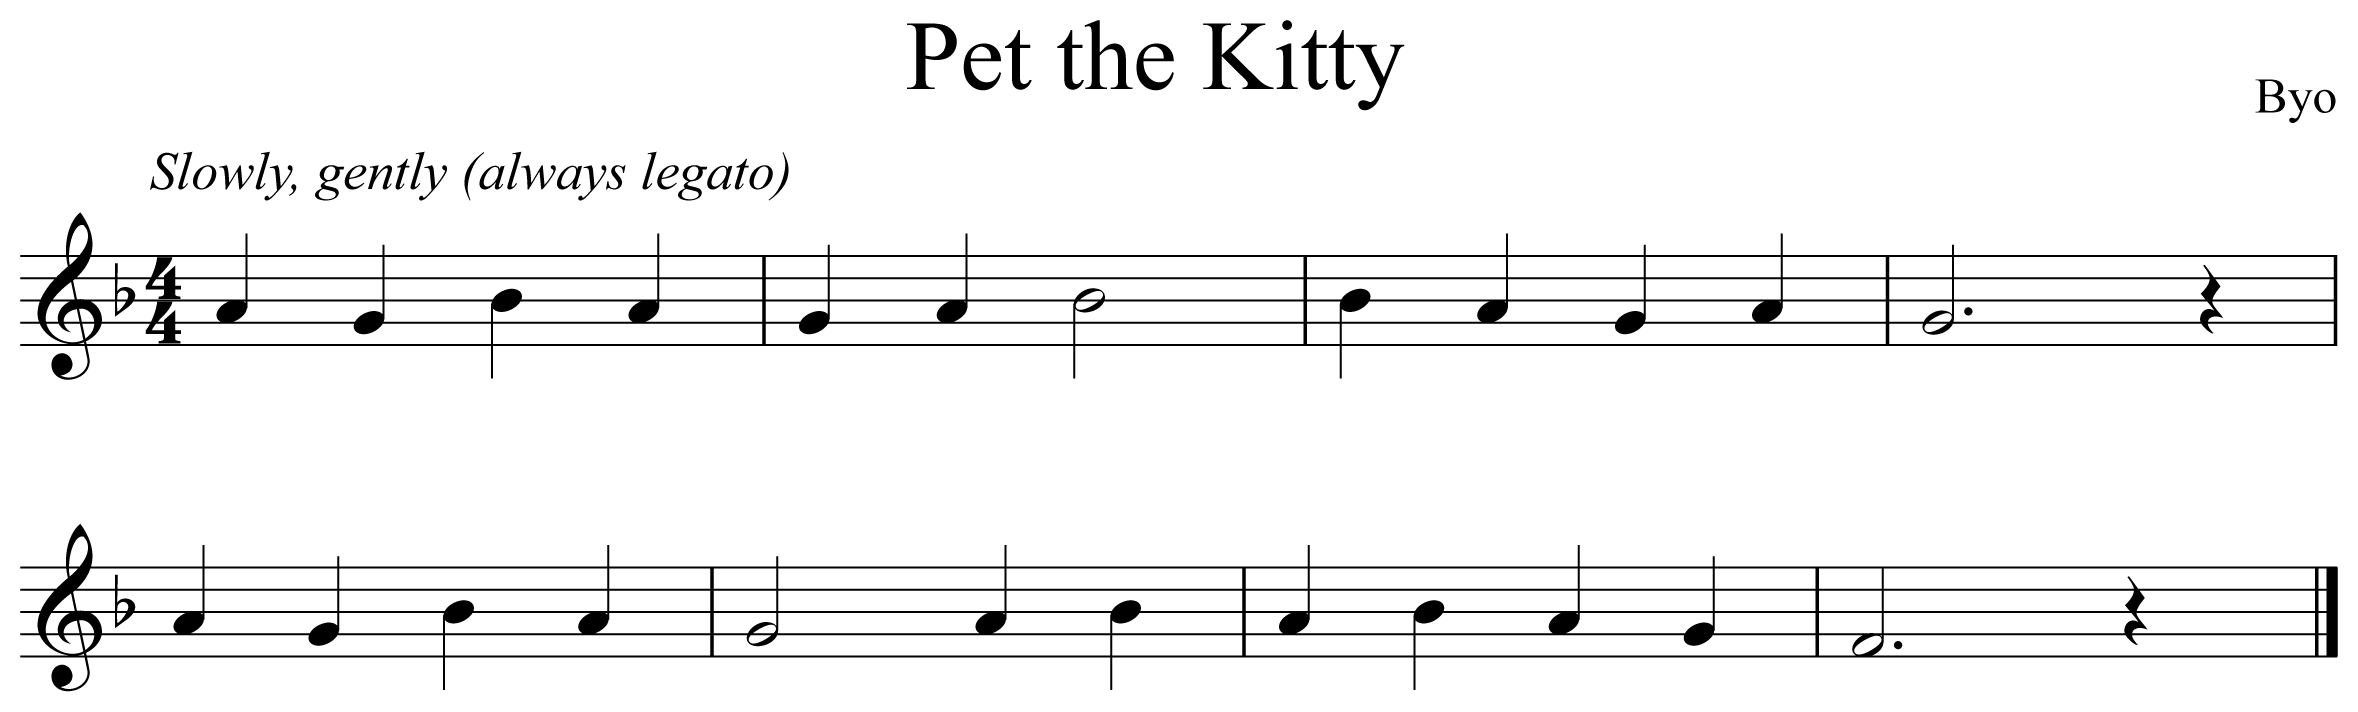 Pet the Kitty Music Notation Trumpet